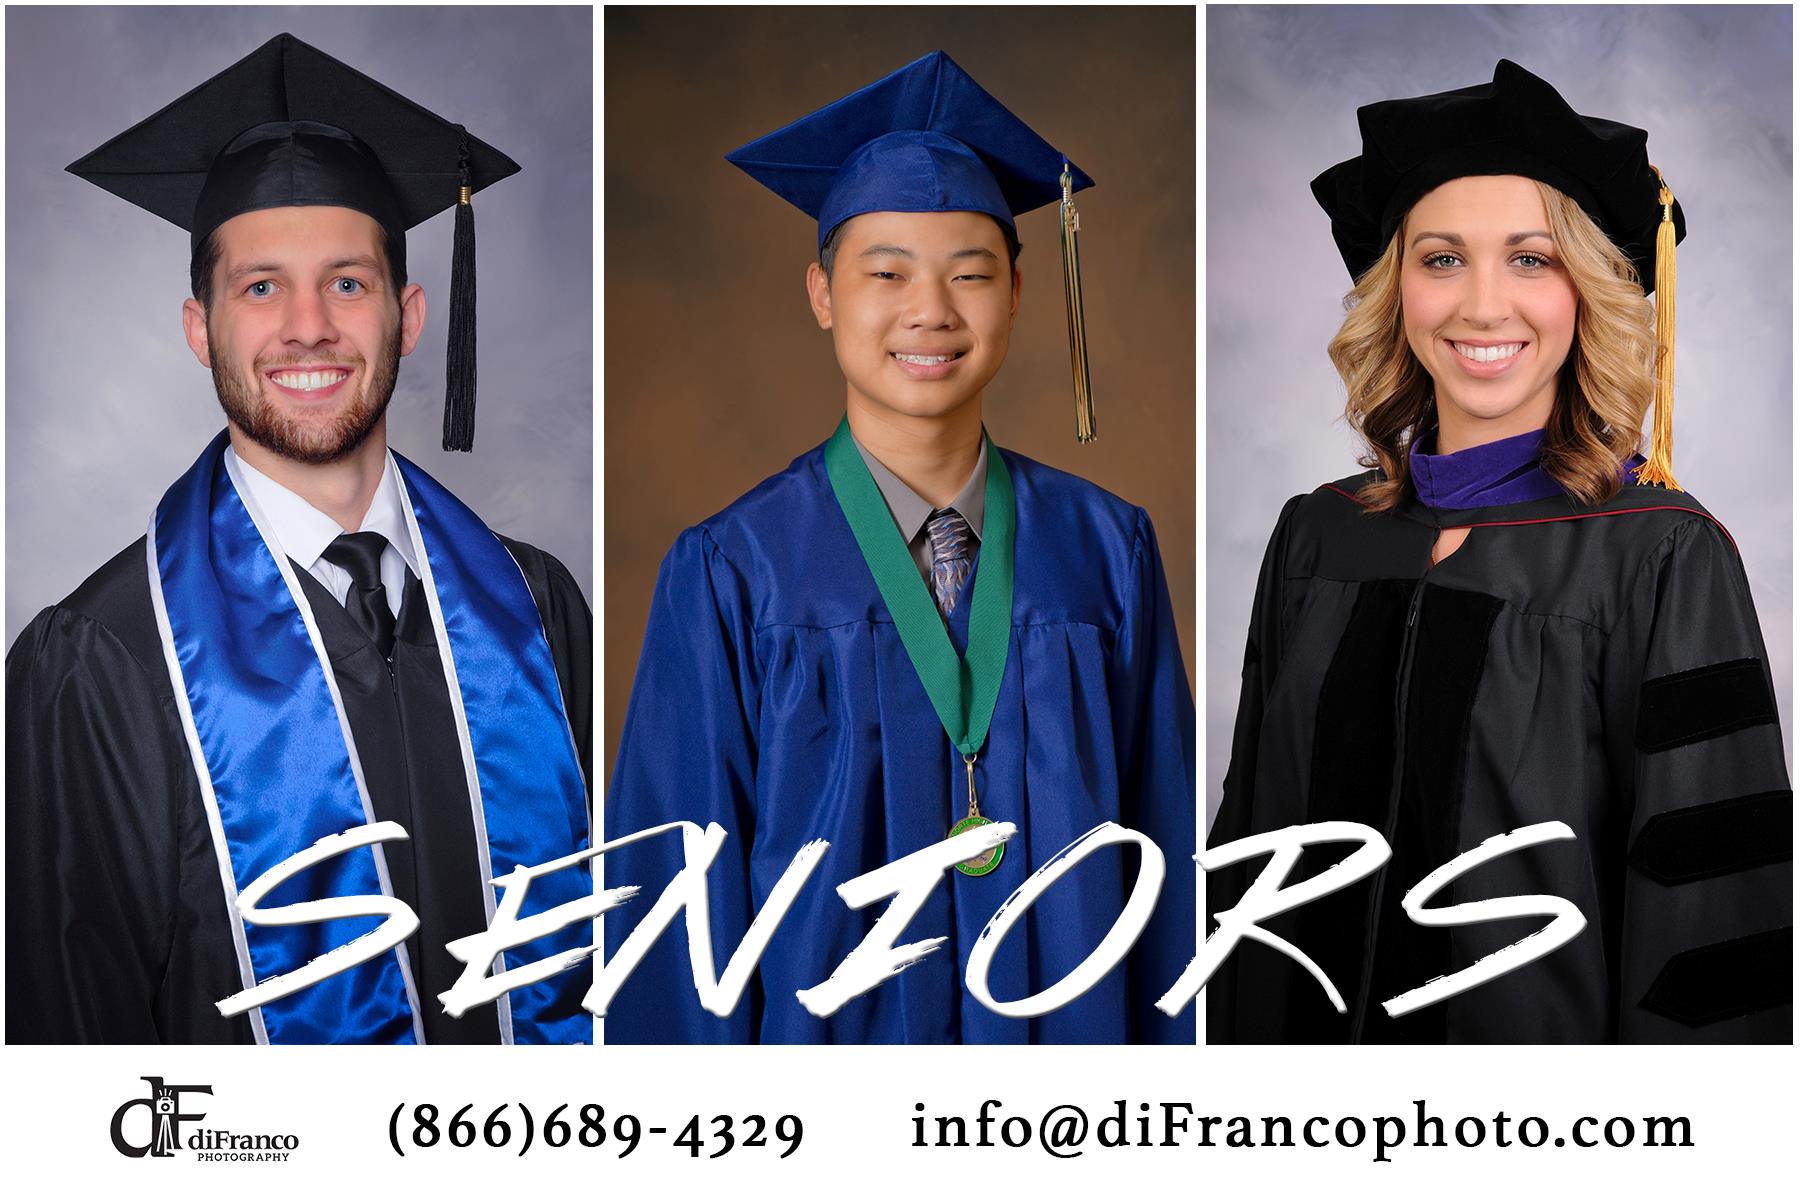 Image of grad photo examples from diFranco Photography. Graduating students wearing cap, gown, and tassel attire.